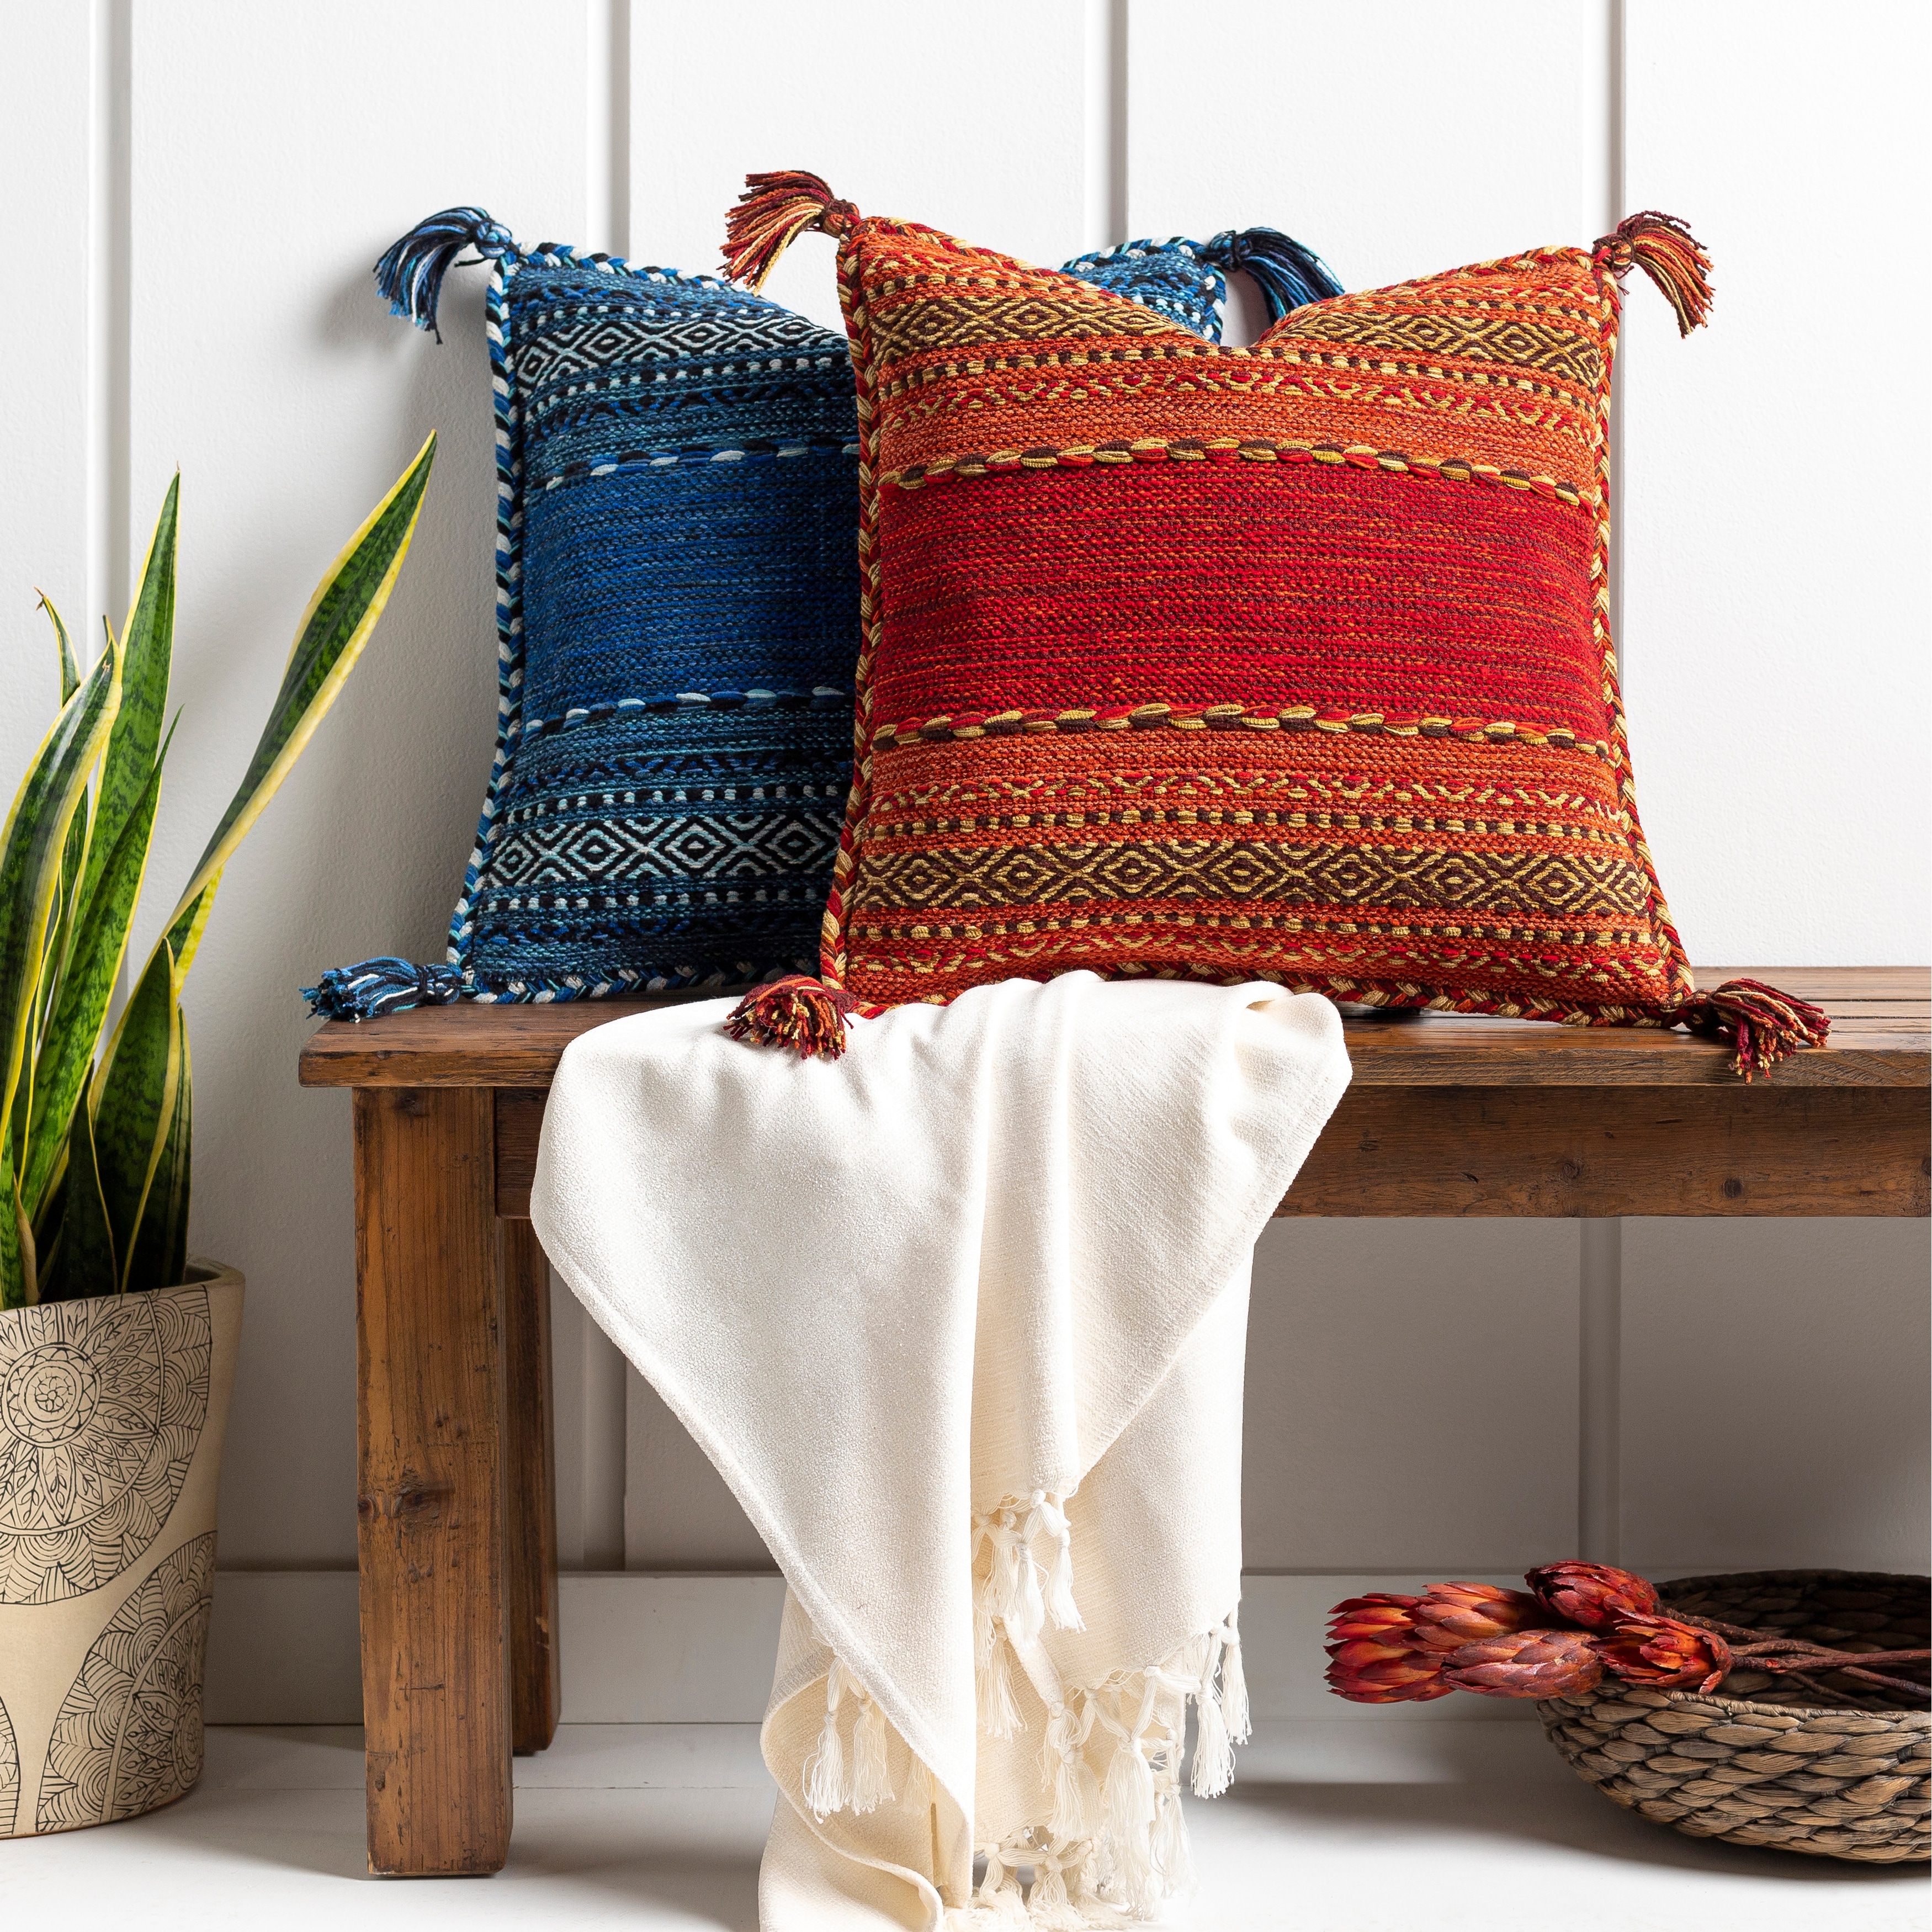 https://ak1.ostkcdn.com/images/products/is/images/direct/b34705dd423af9cebdfd51e36488c6eff736b01e/Southwest-Tassels-Pillow-Cover.jpg